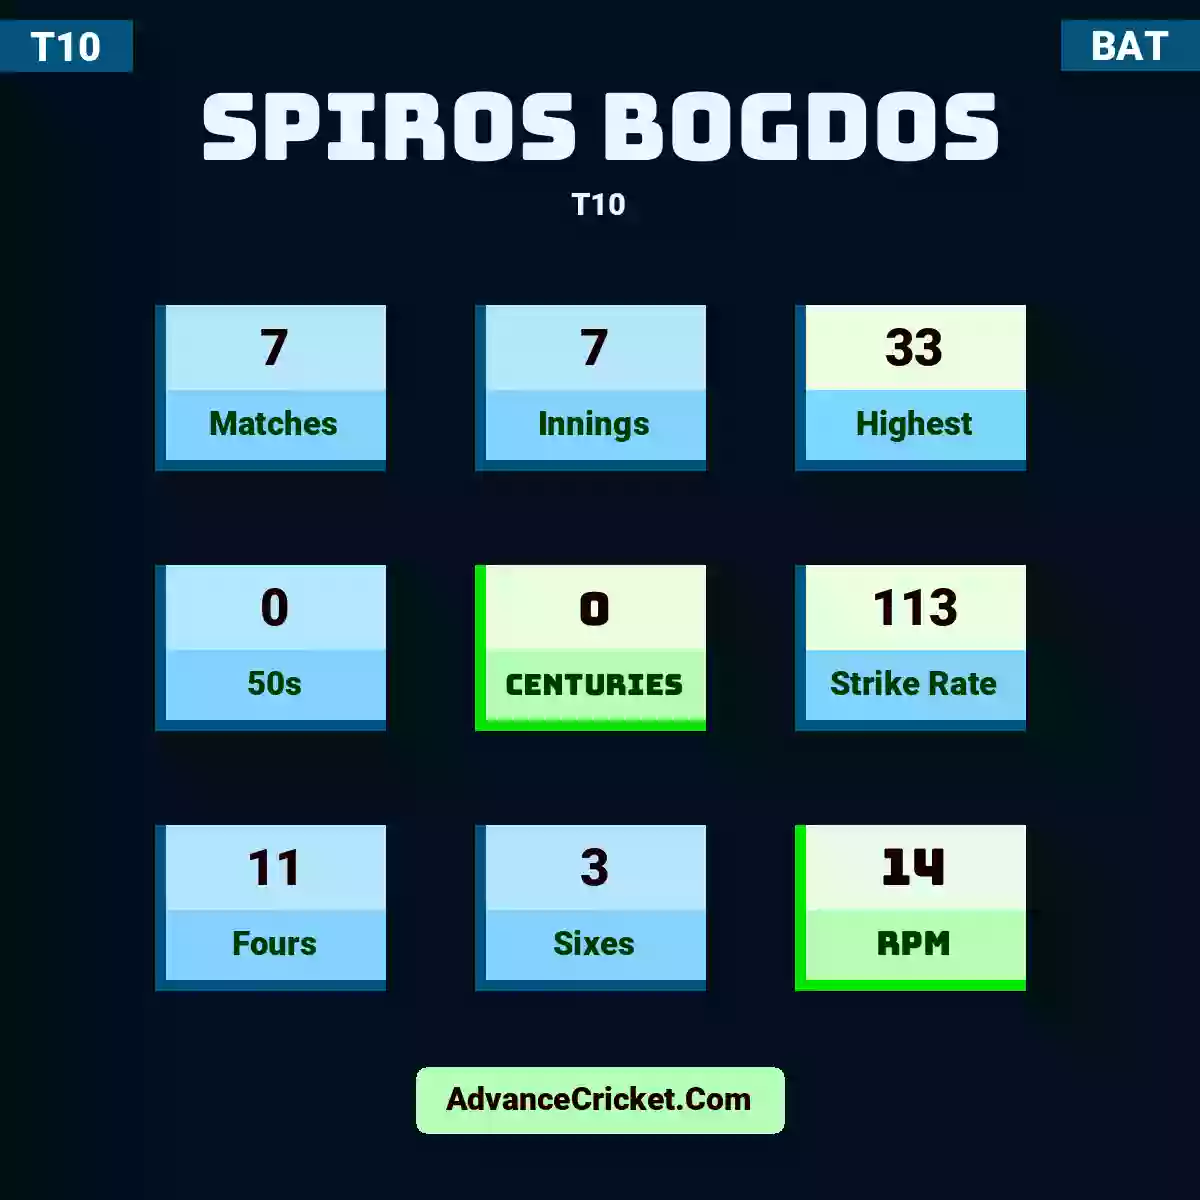 Spiros Bogdos T10 , Spiros Bogdos played 7 matches, scored 33 runs as highest, 0 half-centuries, and 0 centuries, with a strike rate of 113. S.Bogdos hit 11 fours and 3 sixes, with an RPM of 14.